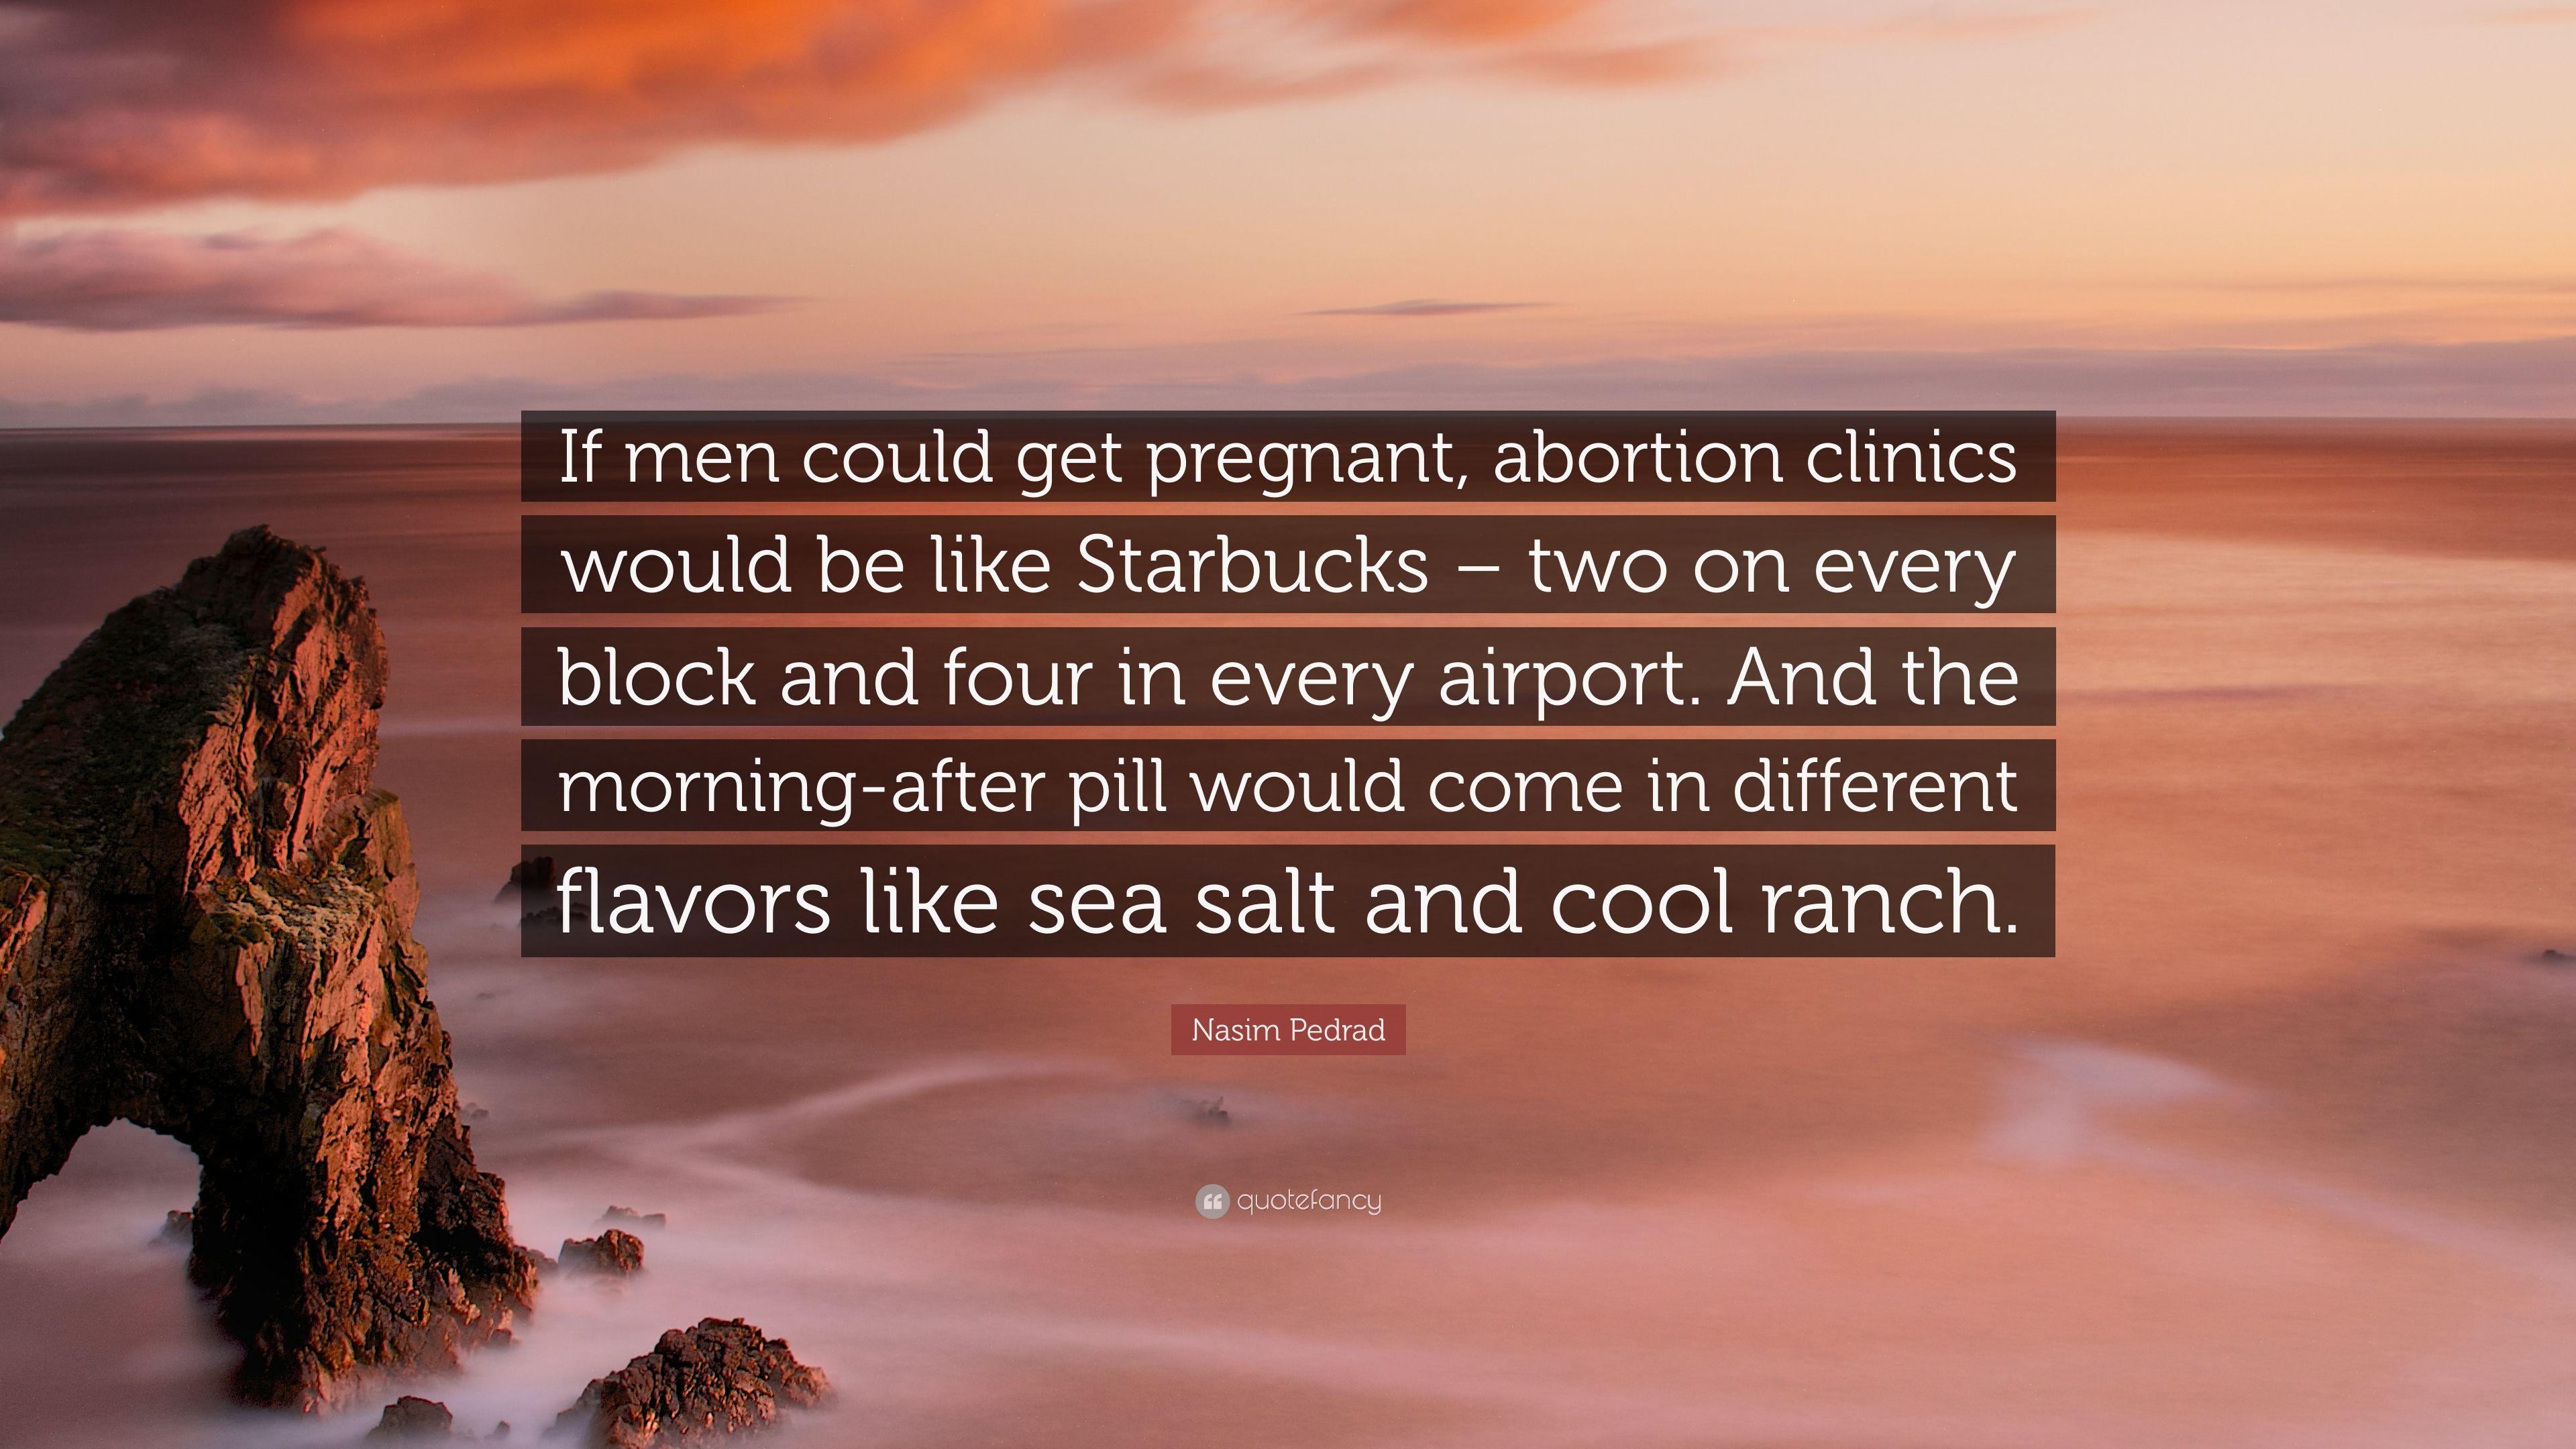 Nasim Pedrad Quote: “If men could get pregnant, abortion clinics